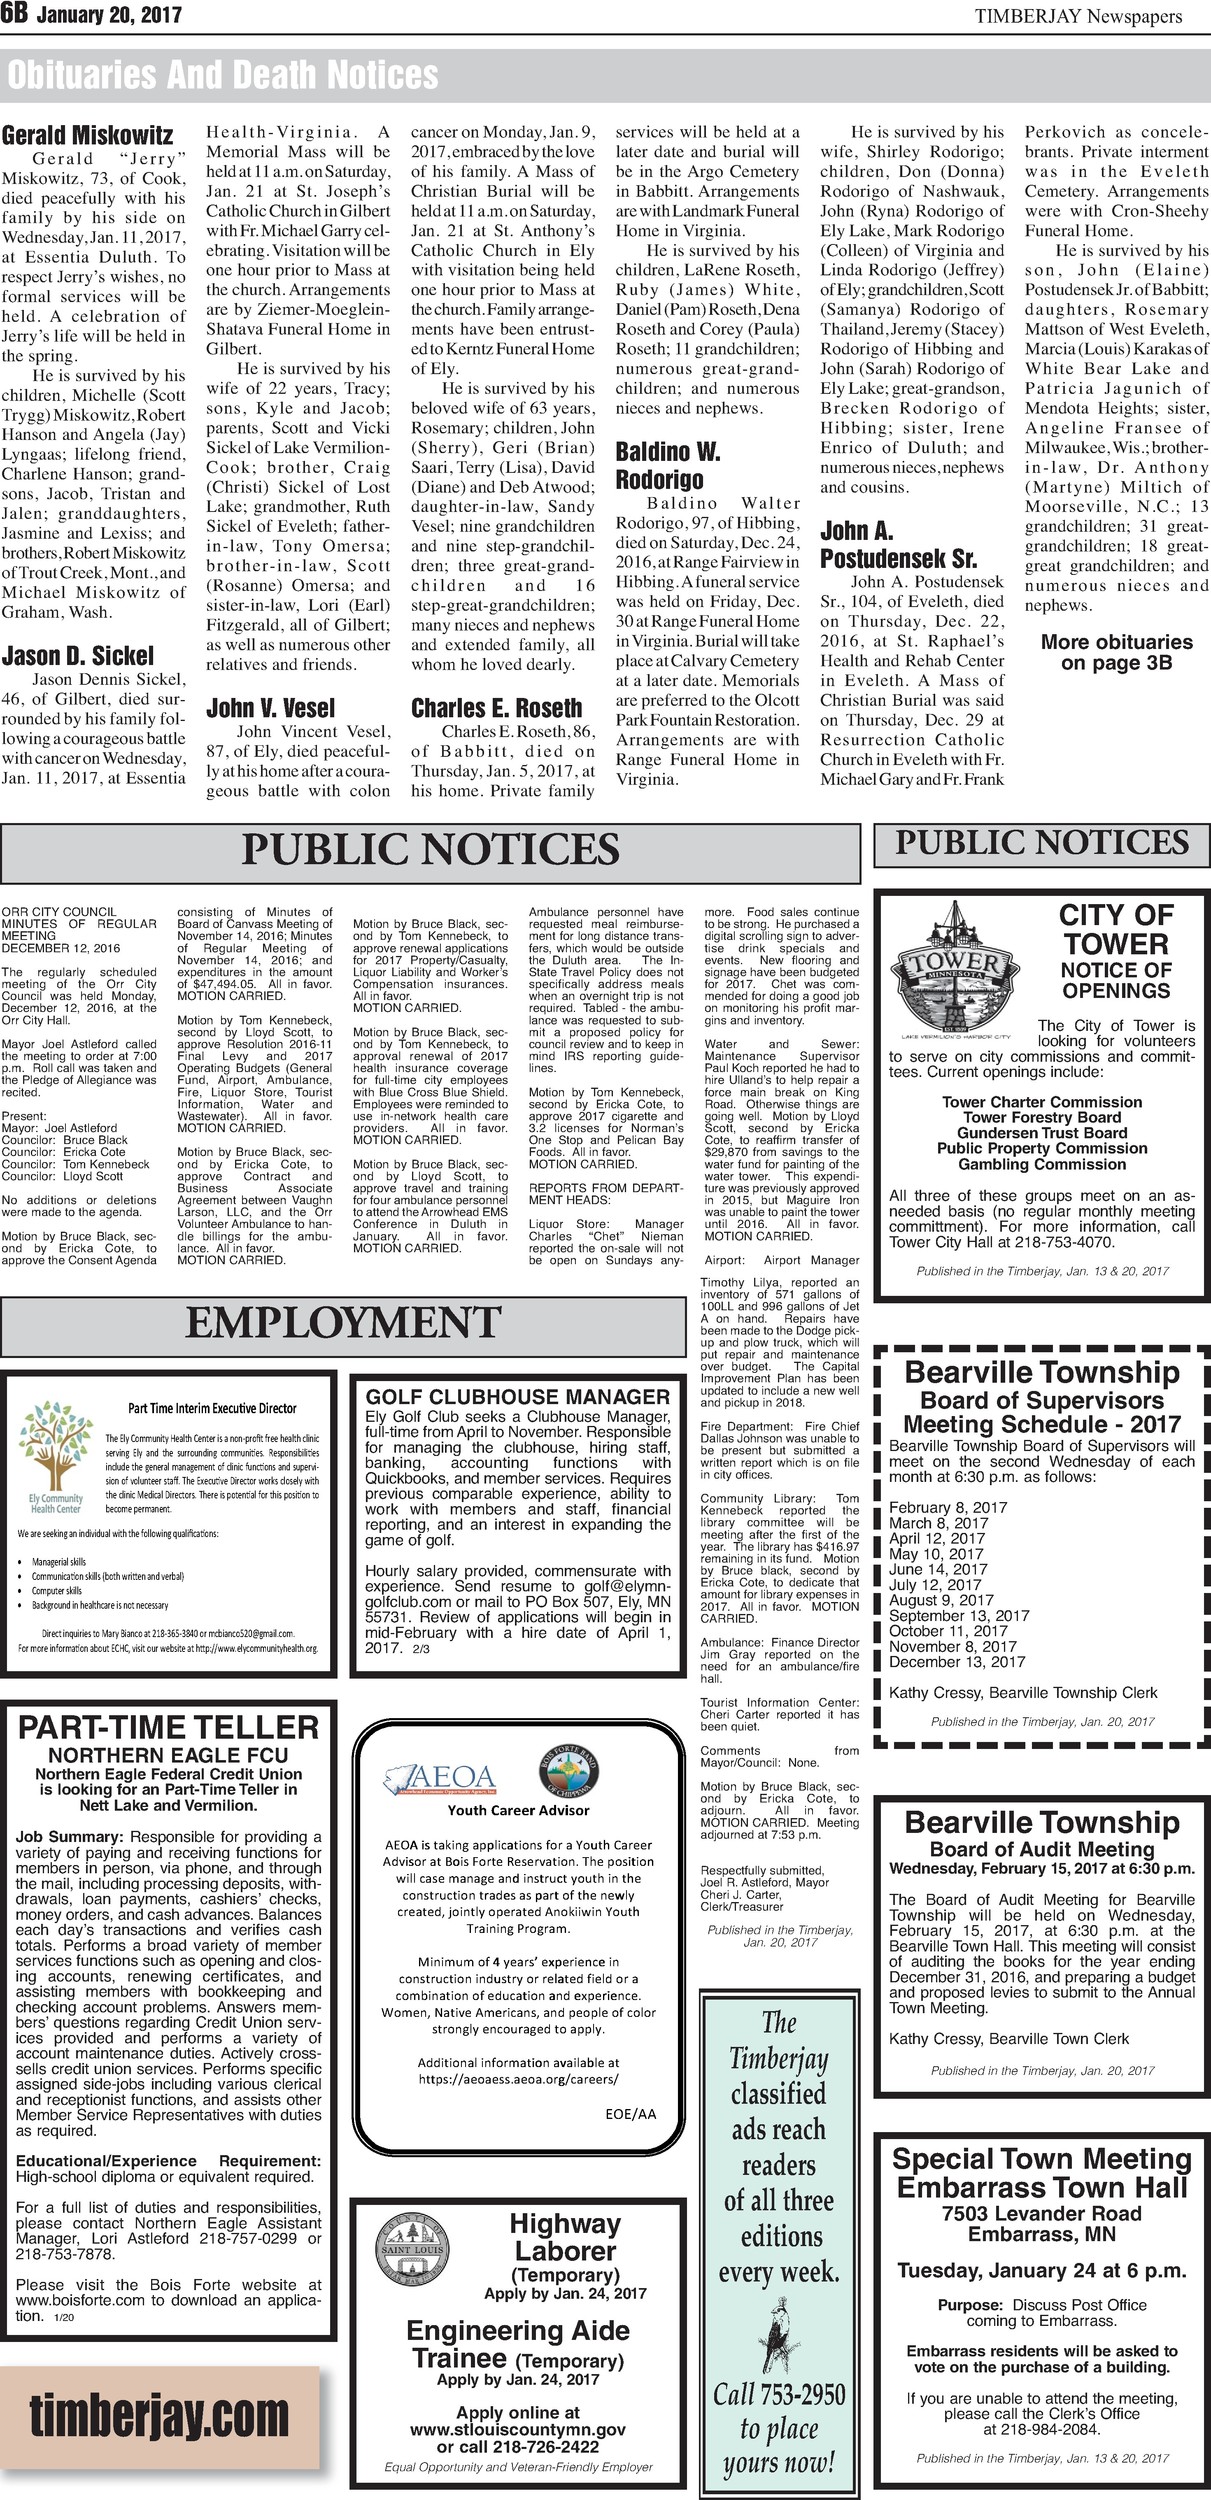 Click here to view the legal notices and classifieds from page 6B